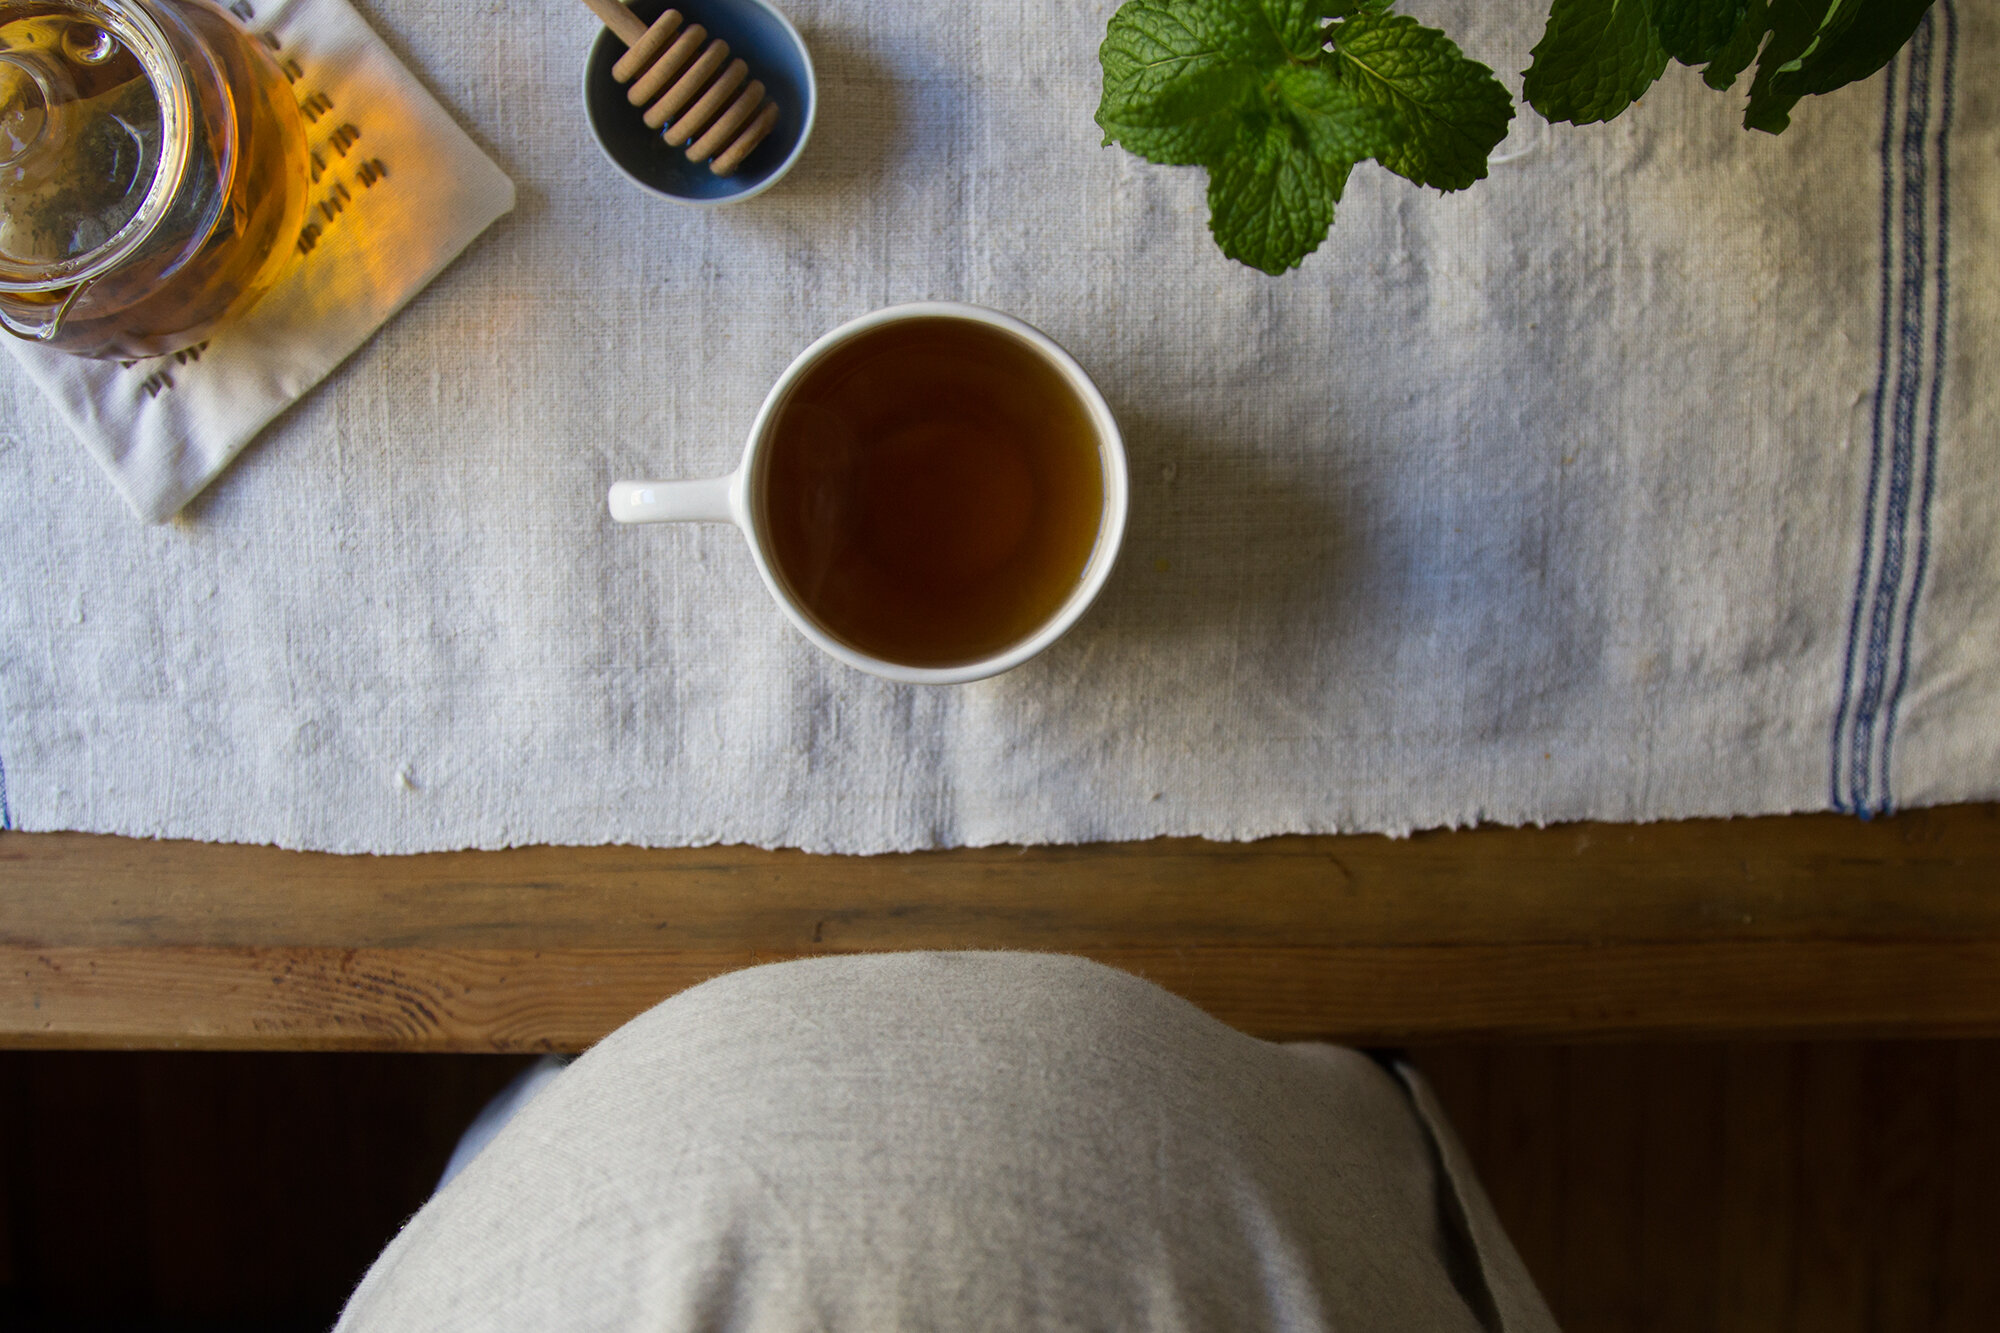 sponsored post with traditional medicinals | reading my tea leaves